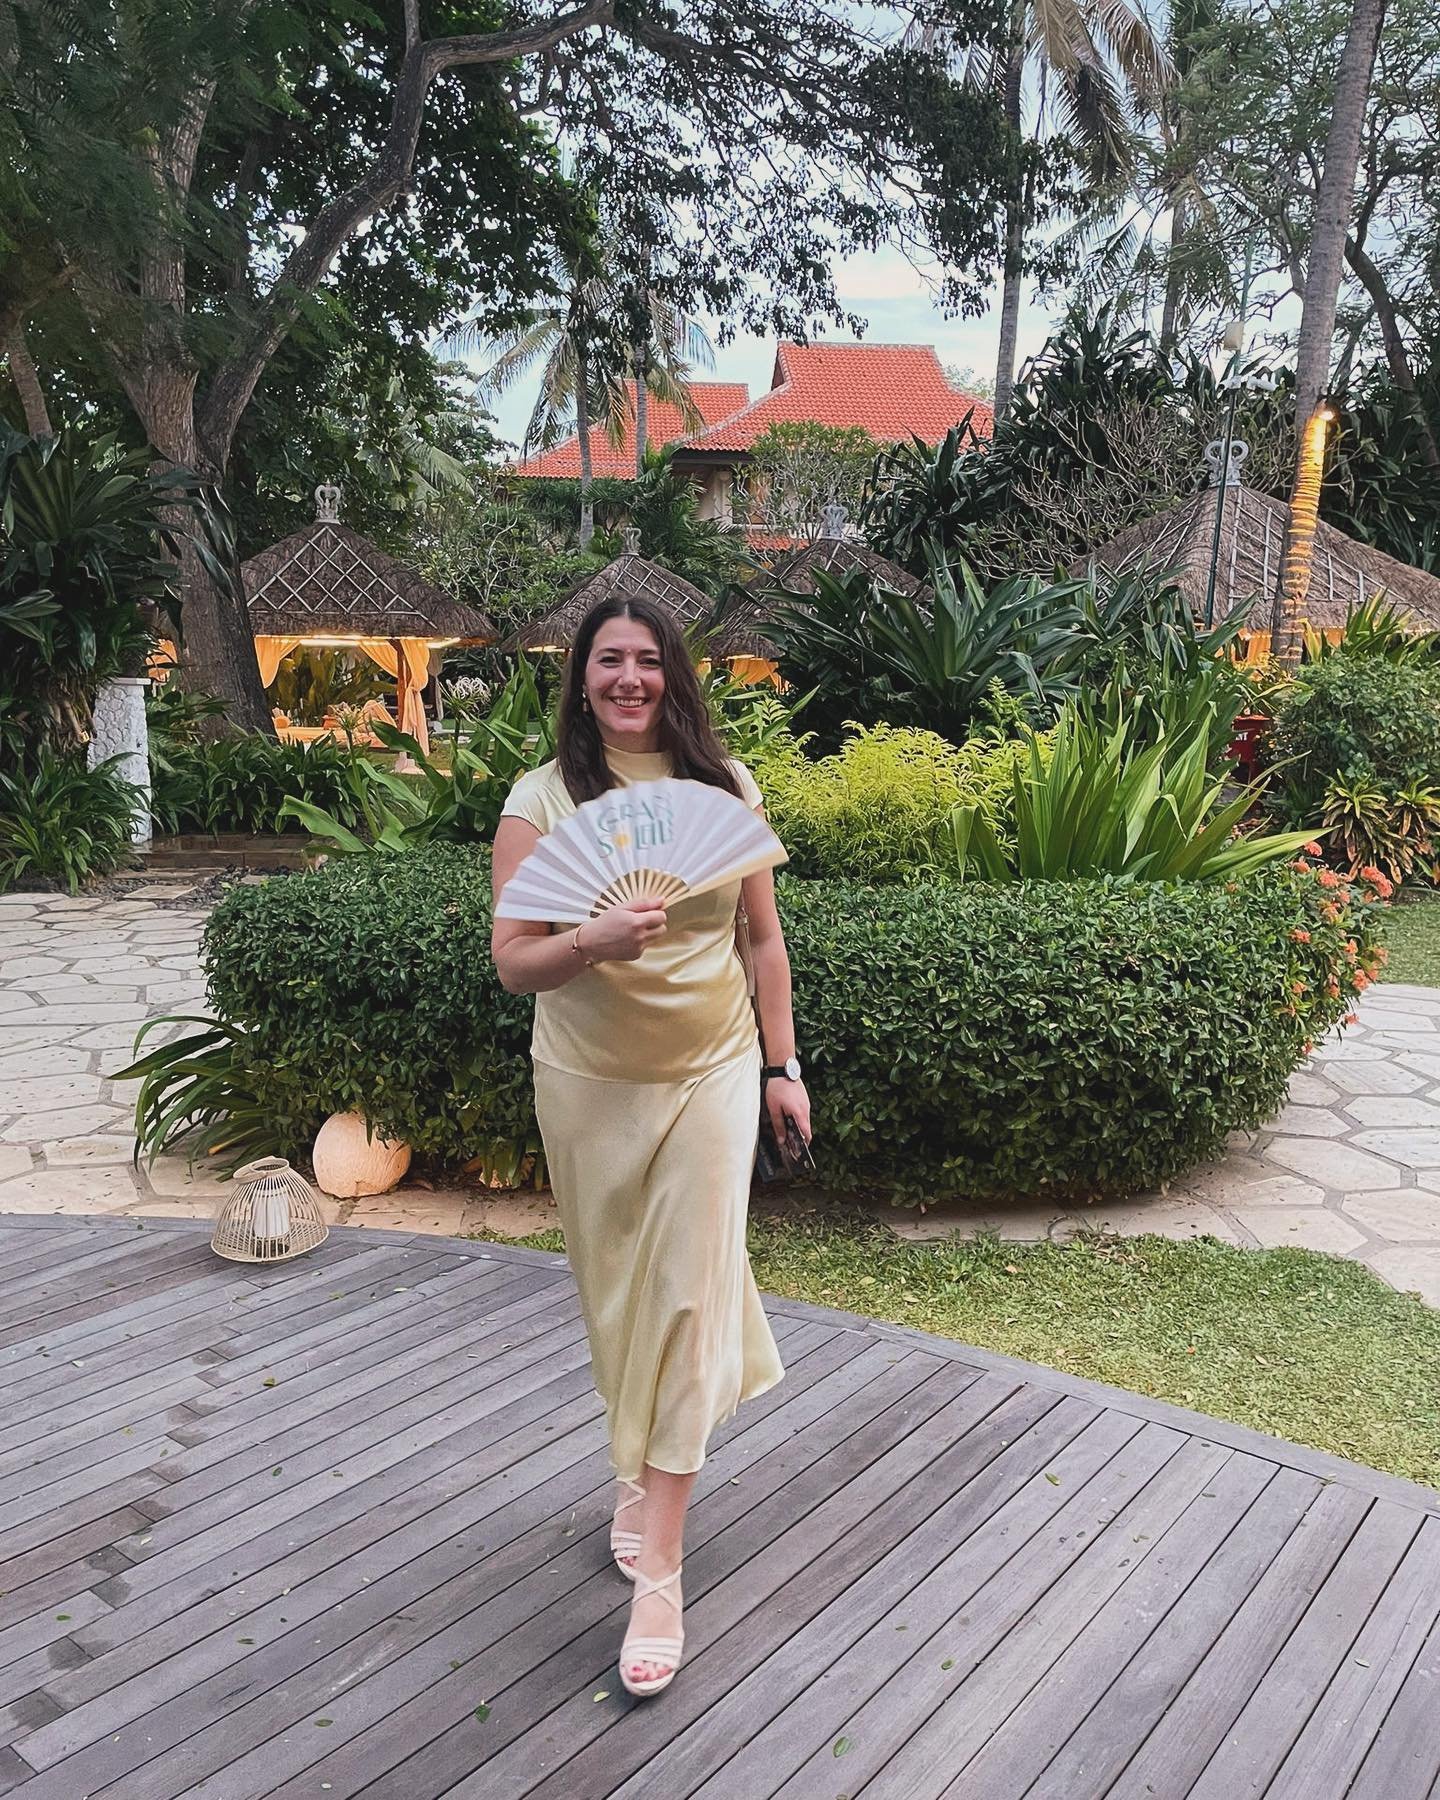 Feeling so grateful, inspired and enrichened after a week in Bali and the international congress of @lesclefsdor 

Connecting with likeminded people and meeting colleagues from all over the world has been magical.

Magic is also seeing the sun rise o